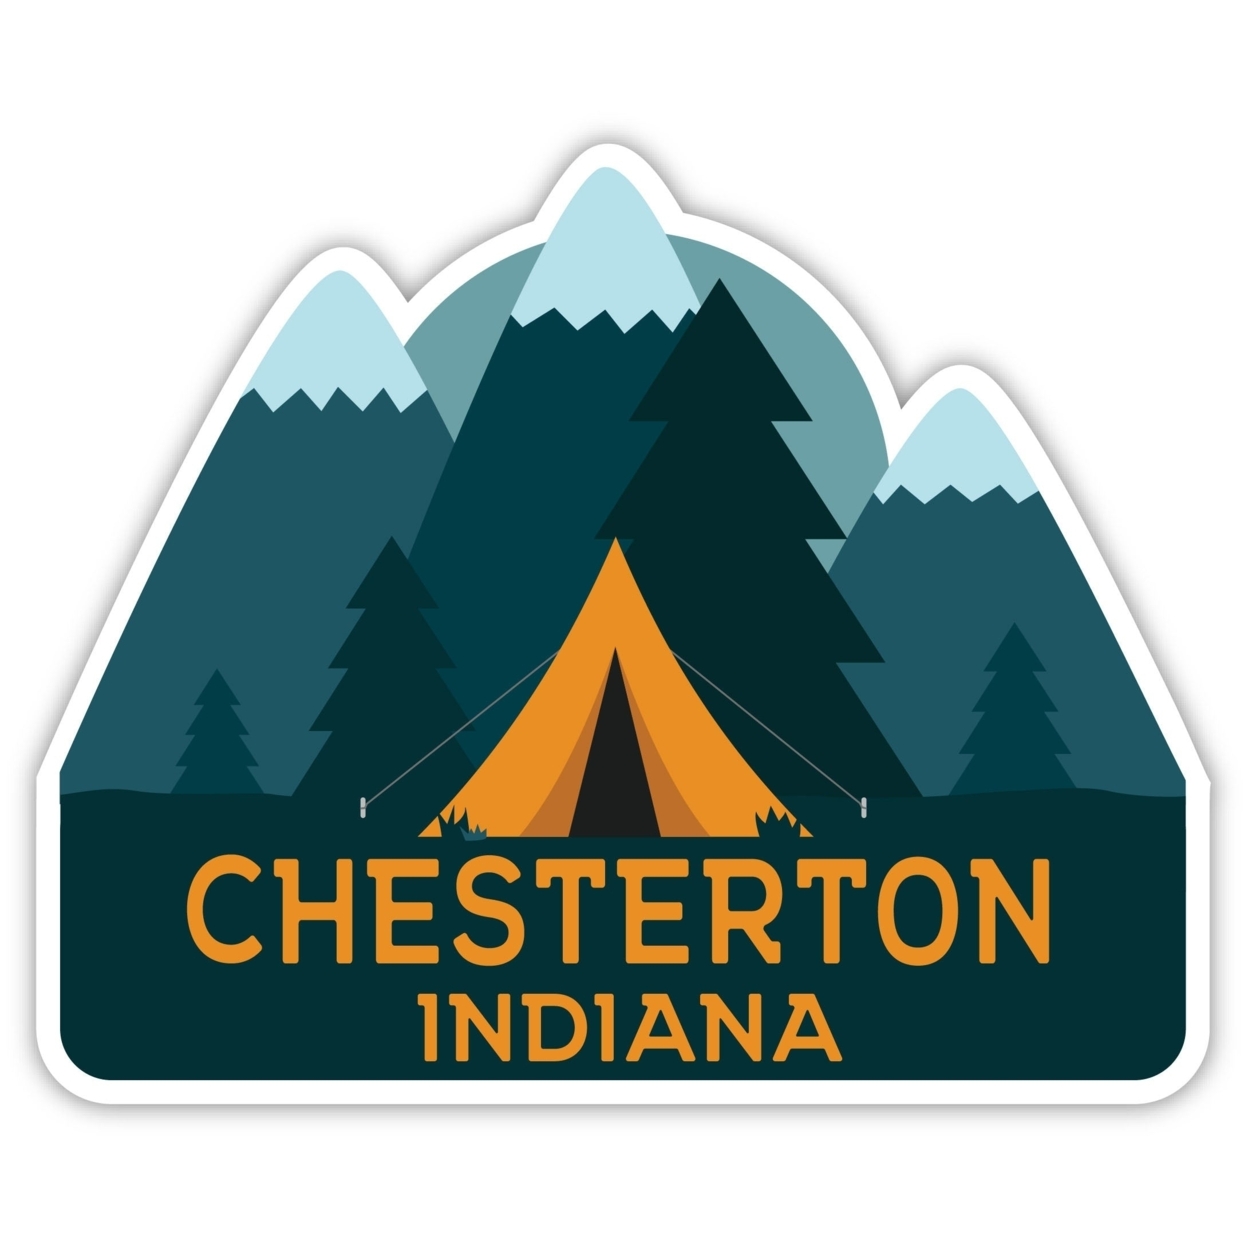 Chesterton Indiana Souvenir Decorative Stickers (Choose Theme And Size) - 4-Pack, 8-Inch, Tent